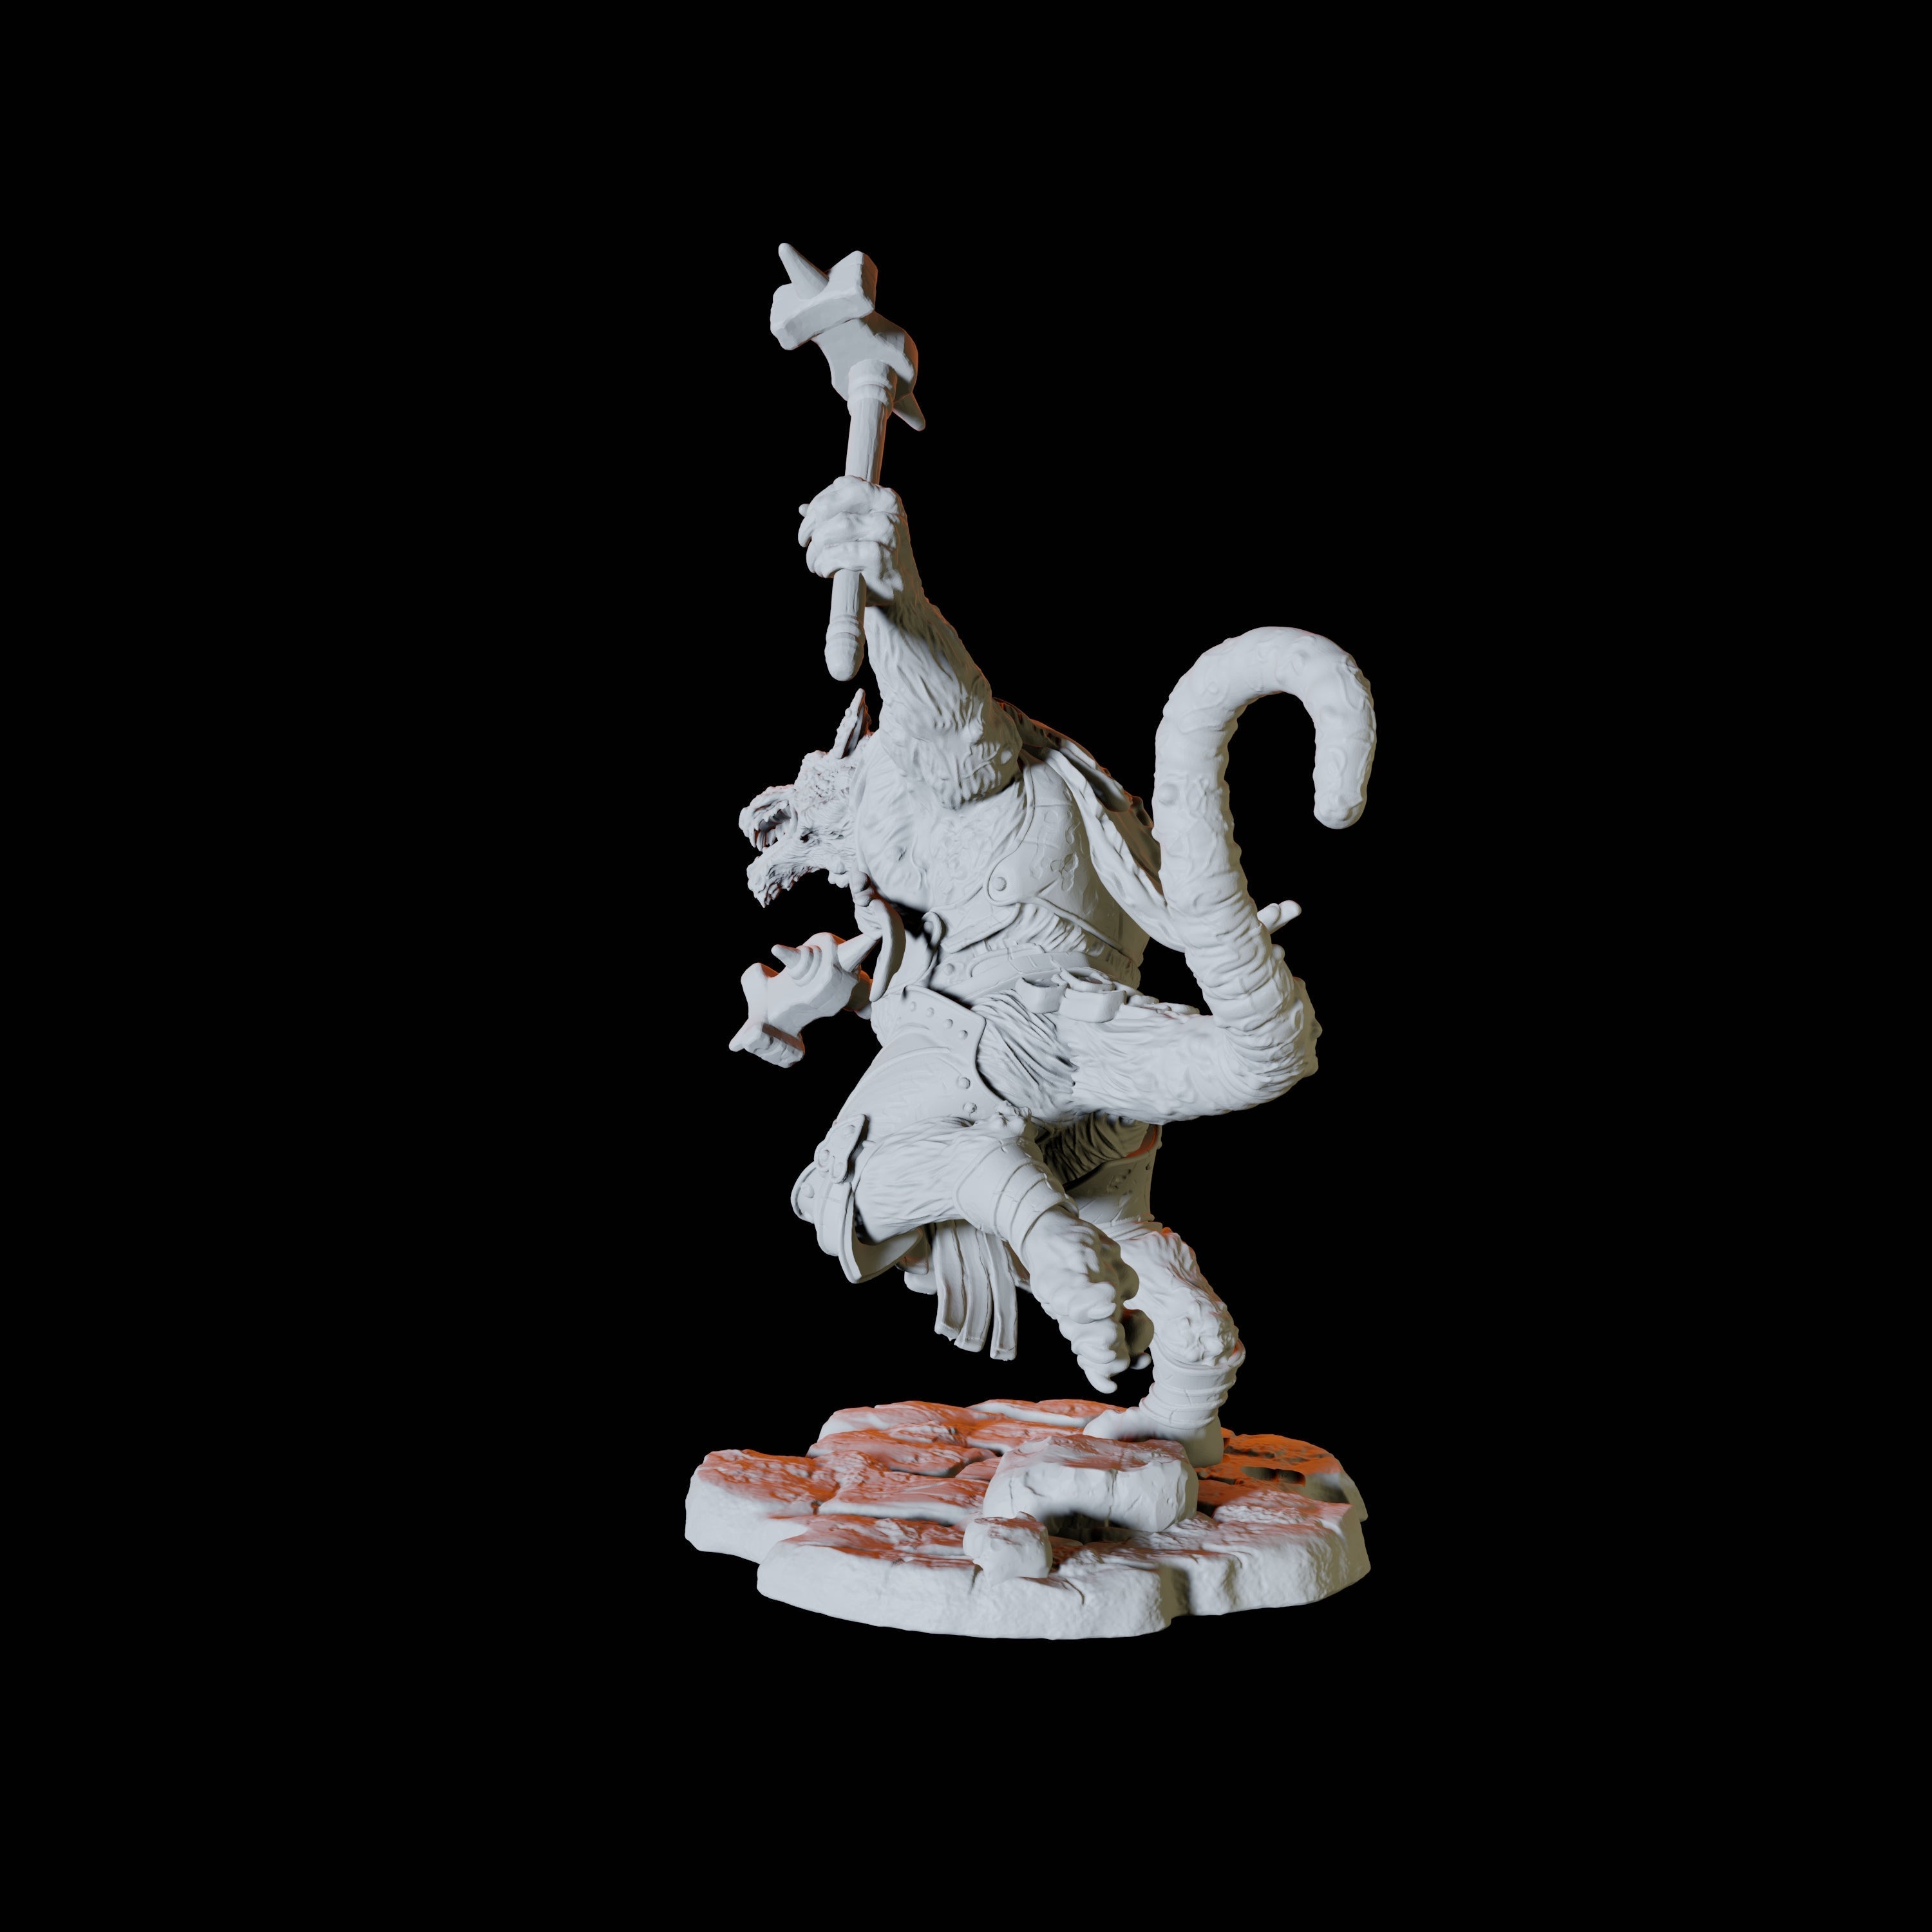 Ratfolk Soldier D Miniature for Dungeons and Dragons, Pathfinder or other TTRPGs